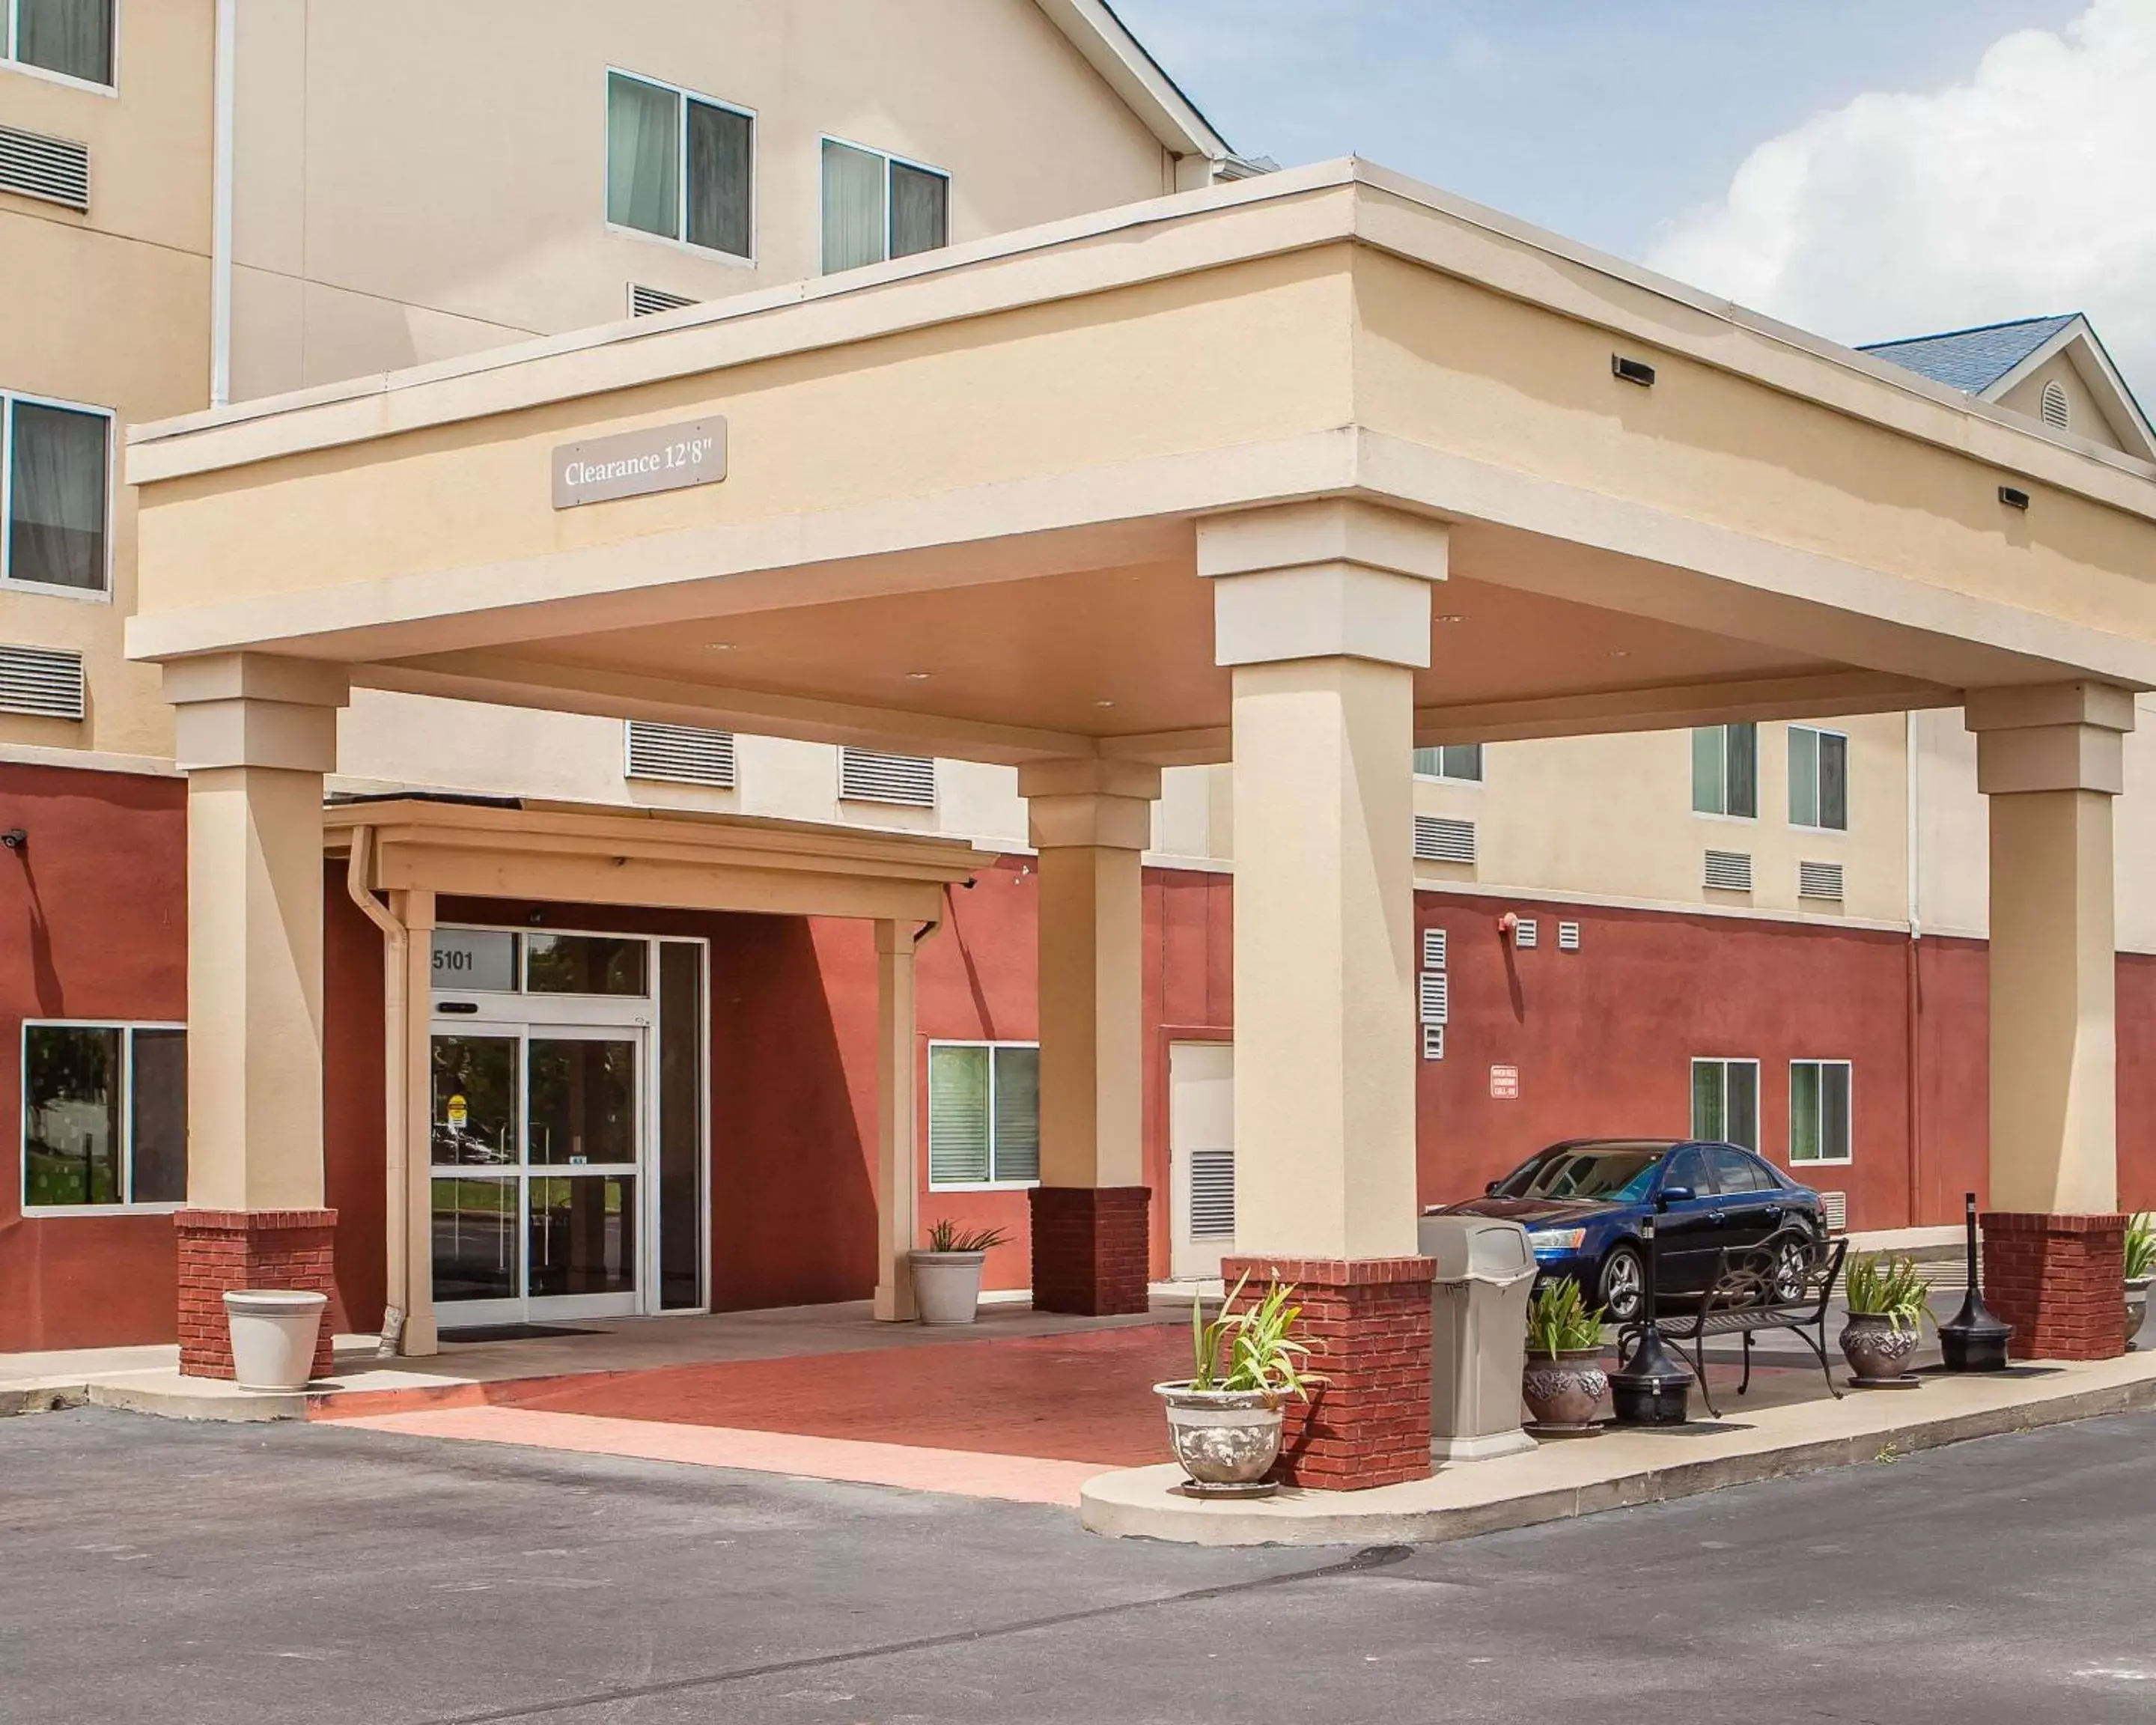 Property Building in Comfort Inn and Suites - Tuscumbia/Muscle Shoals